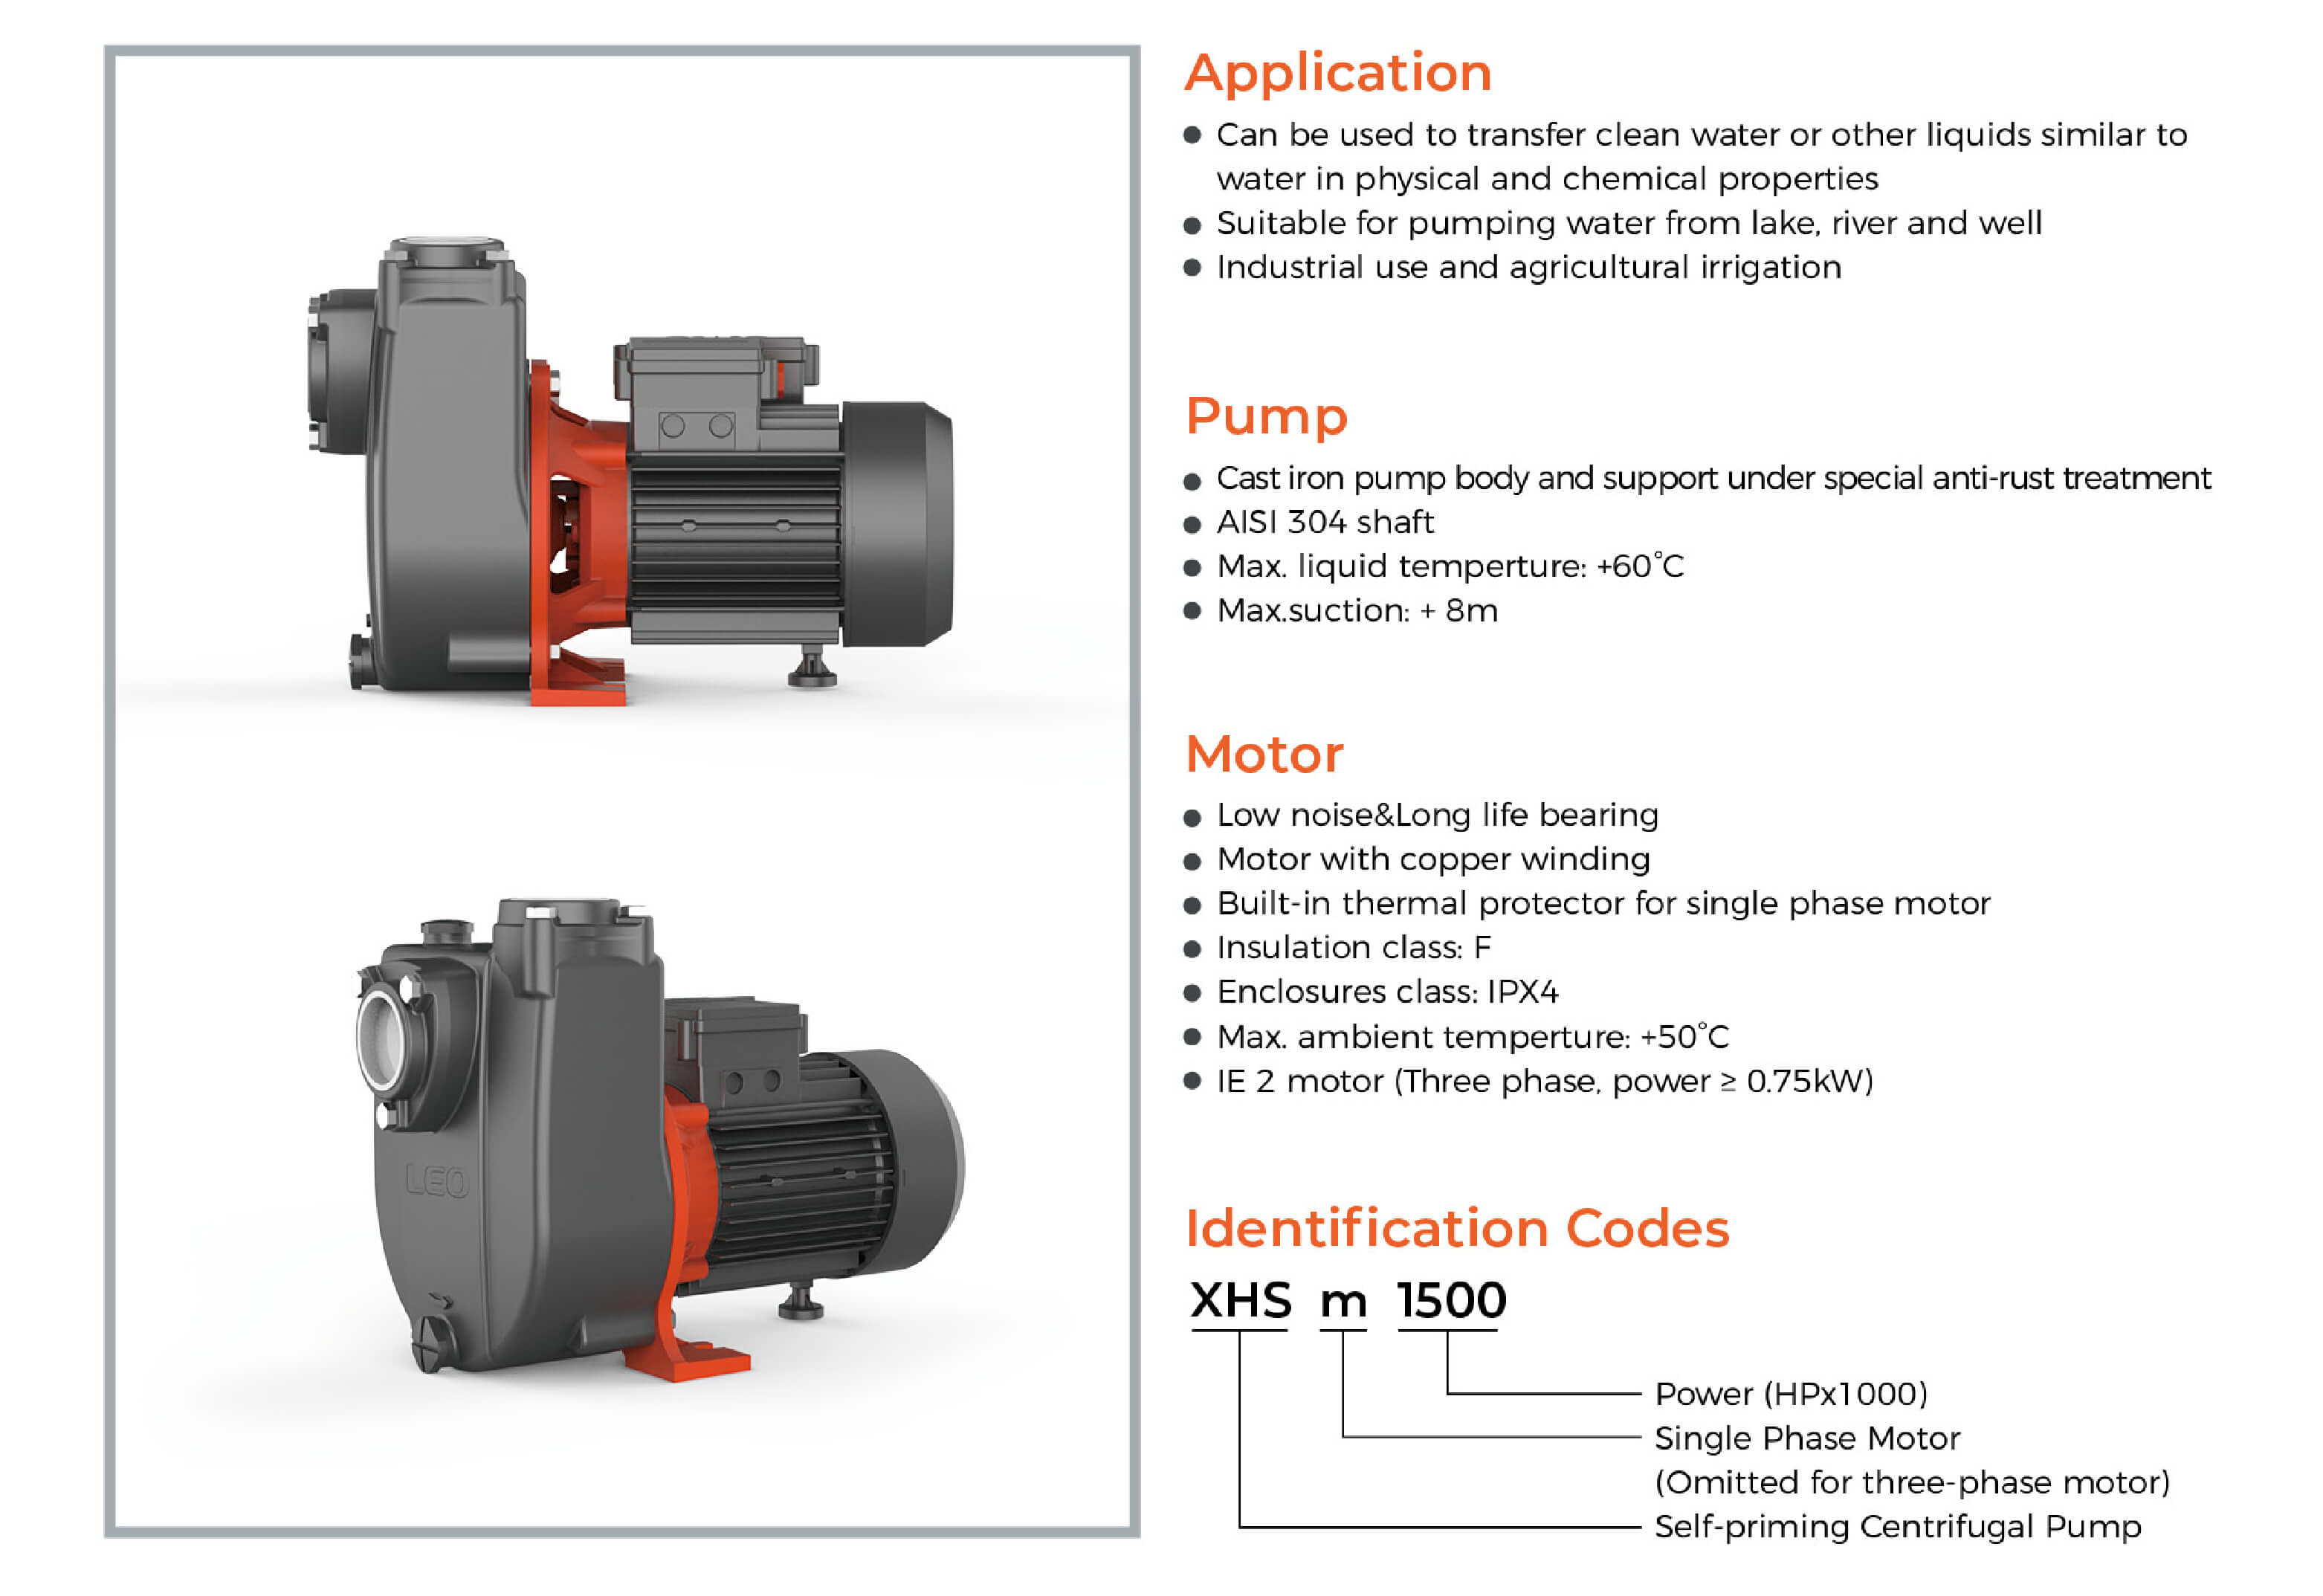 XHSm Self-priming Centrifugal Pump Features